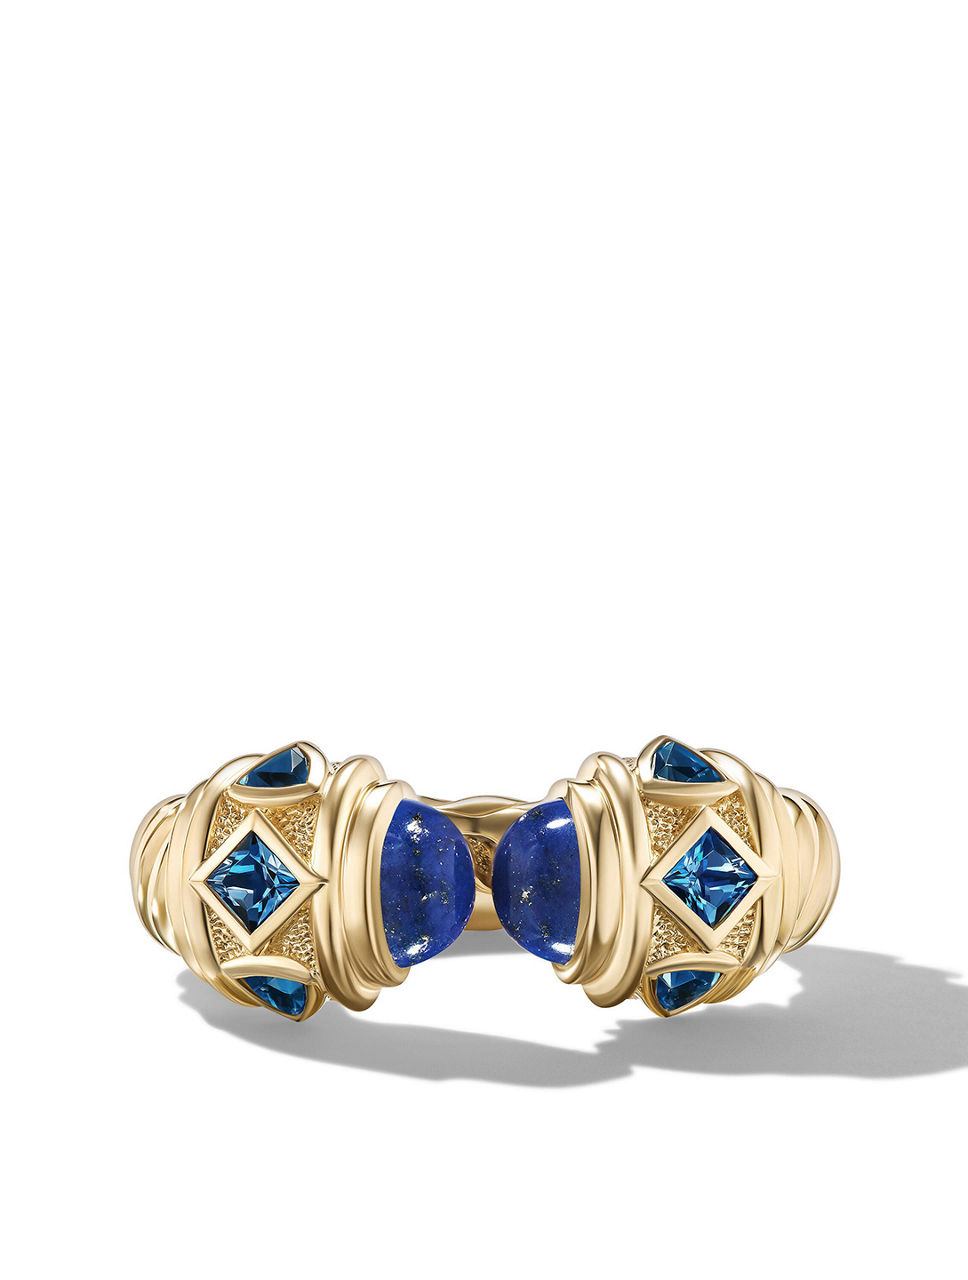 Renaissance® Color Ring 18k Yellow Gold With Lapis And Hampton Blue Topaz